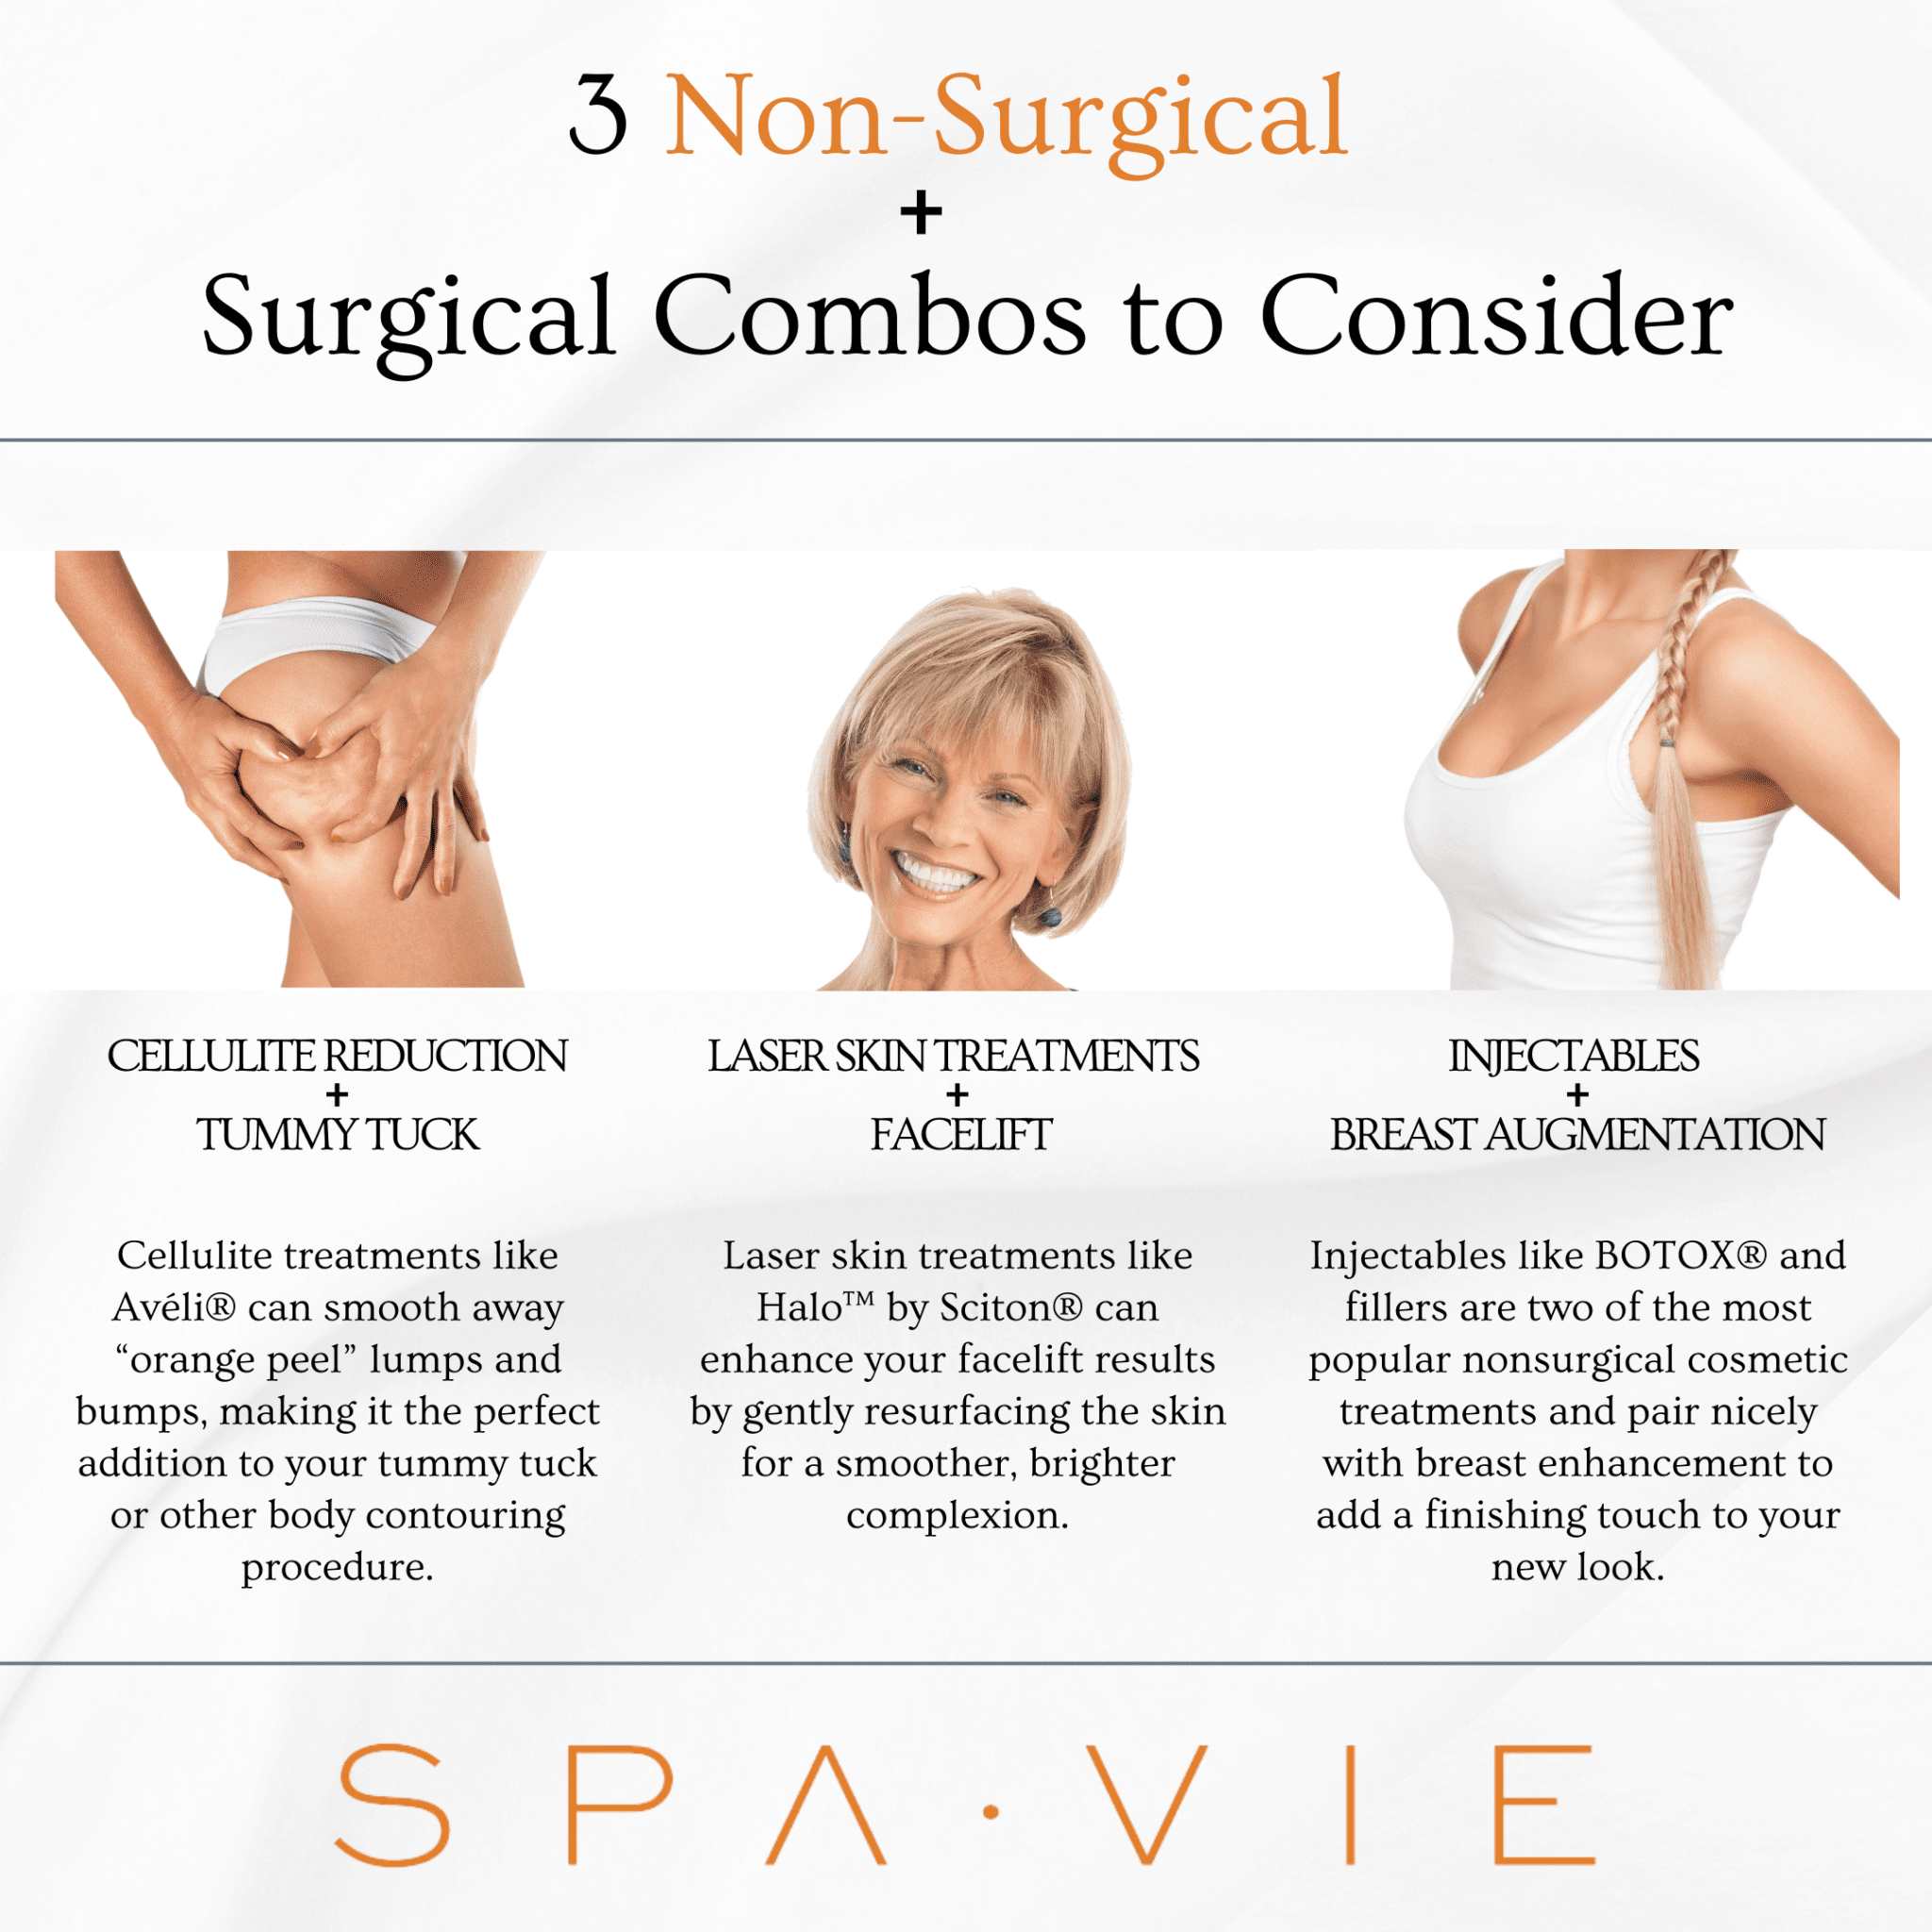 3 Non-Surgical + Surgical Combos to Consider